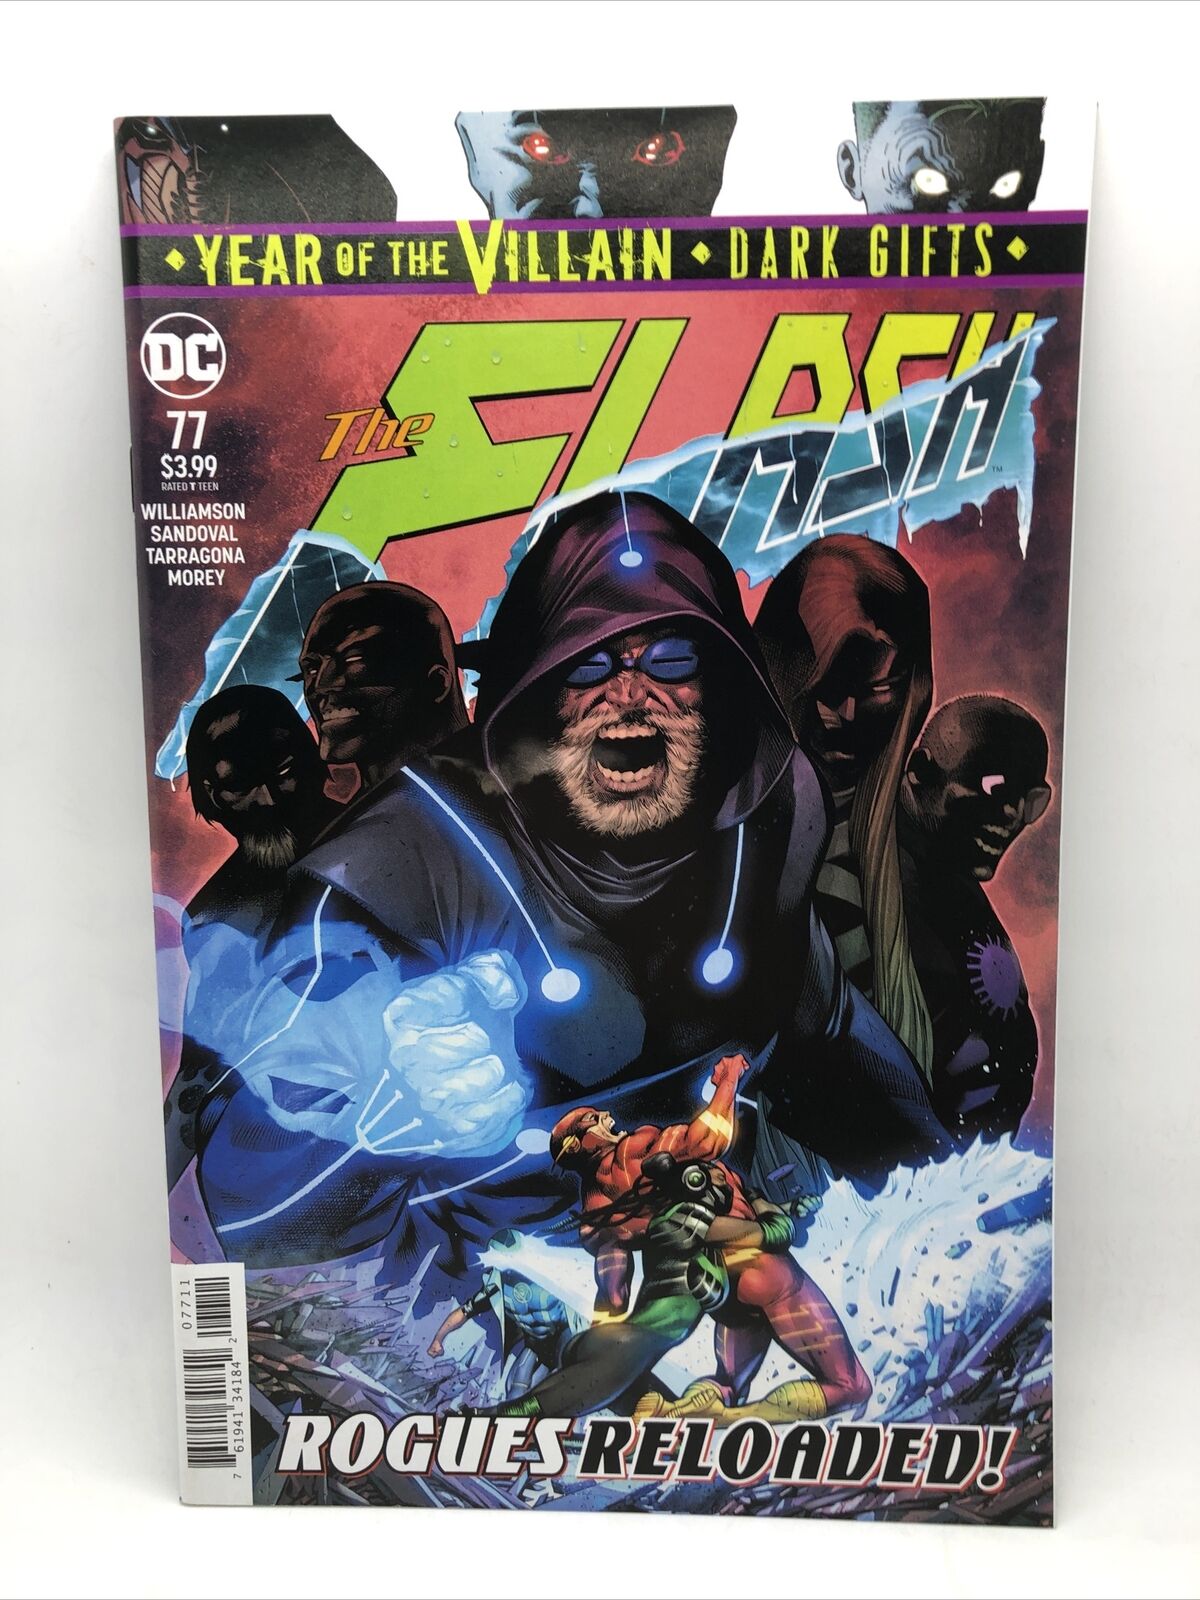 DC Comics The Flash #77 Year Of The Villain Dark Gifts Rogues Reloaded